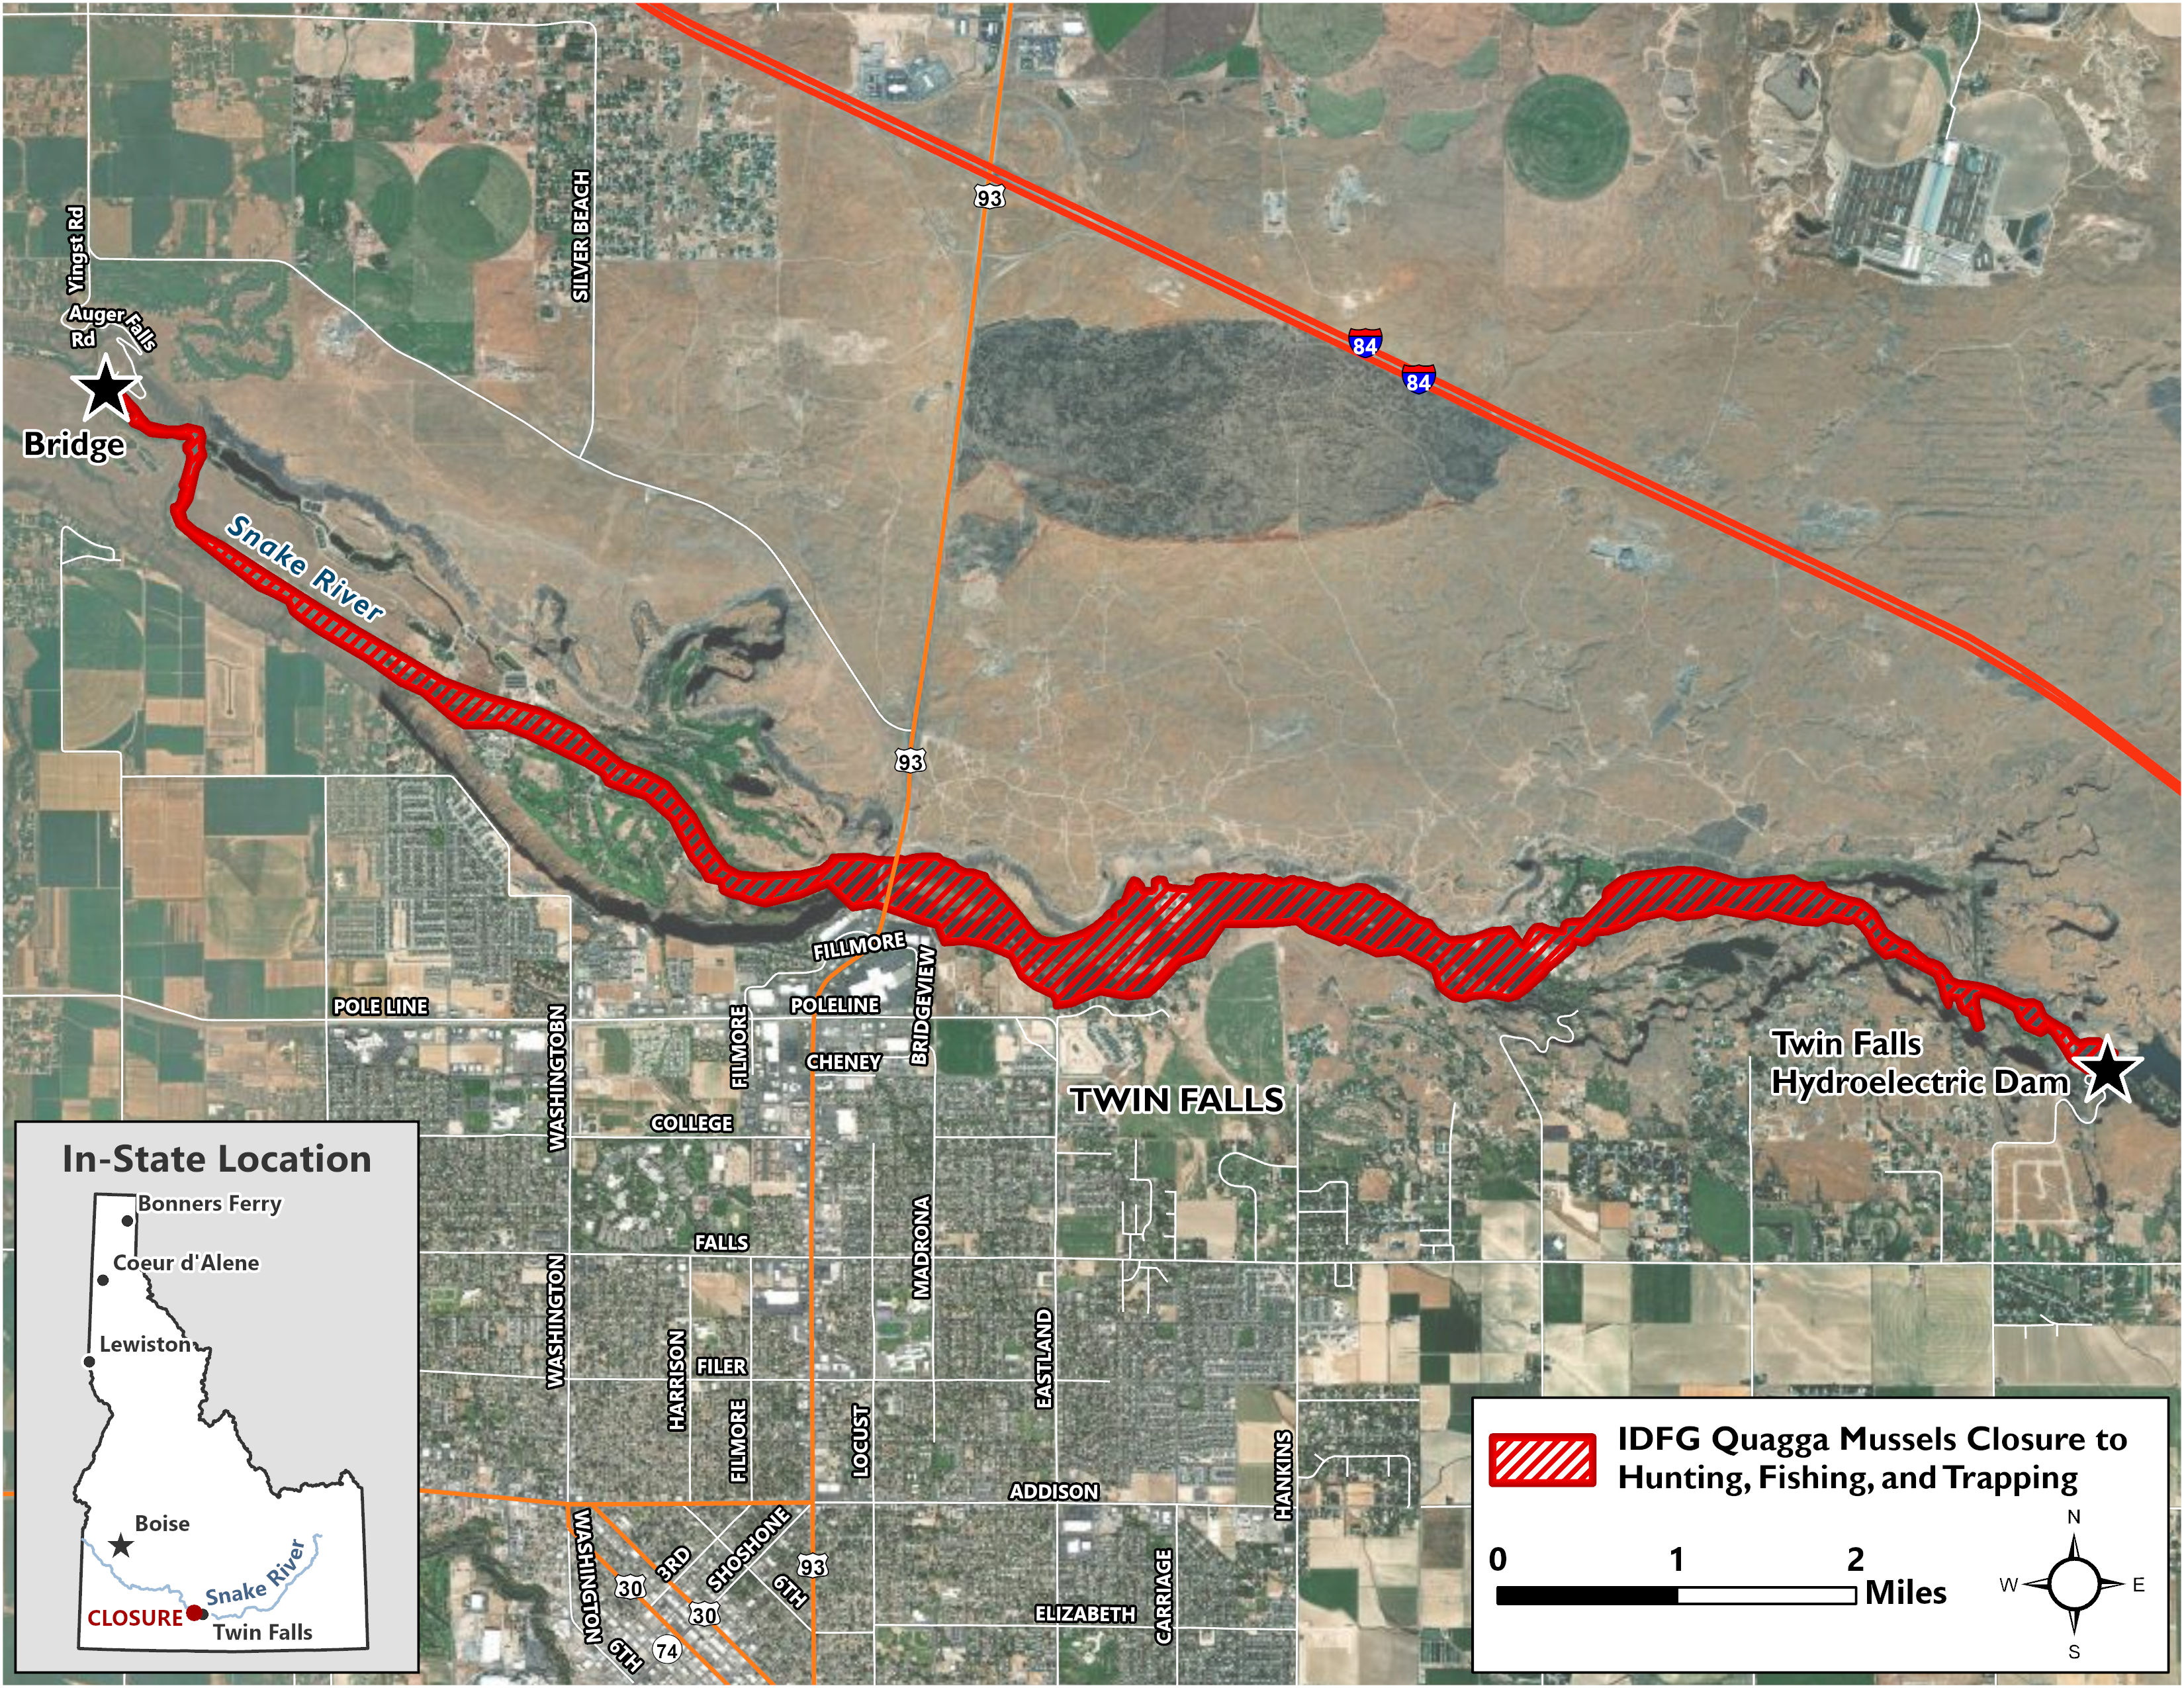 A map showing the portion of the Snake River that was closed.